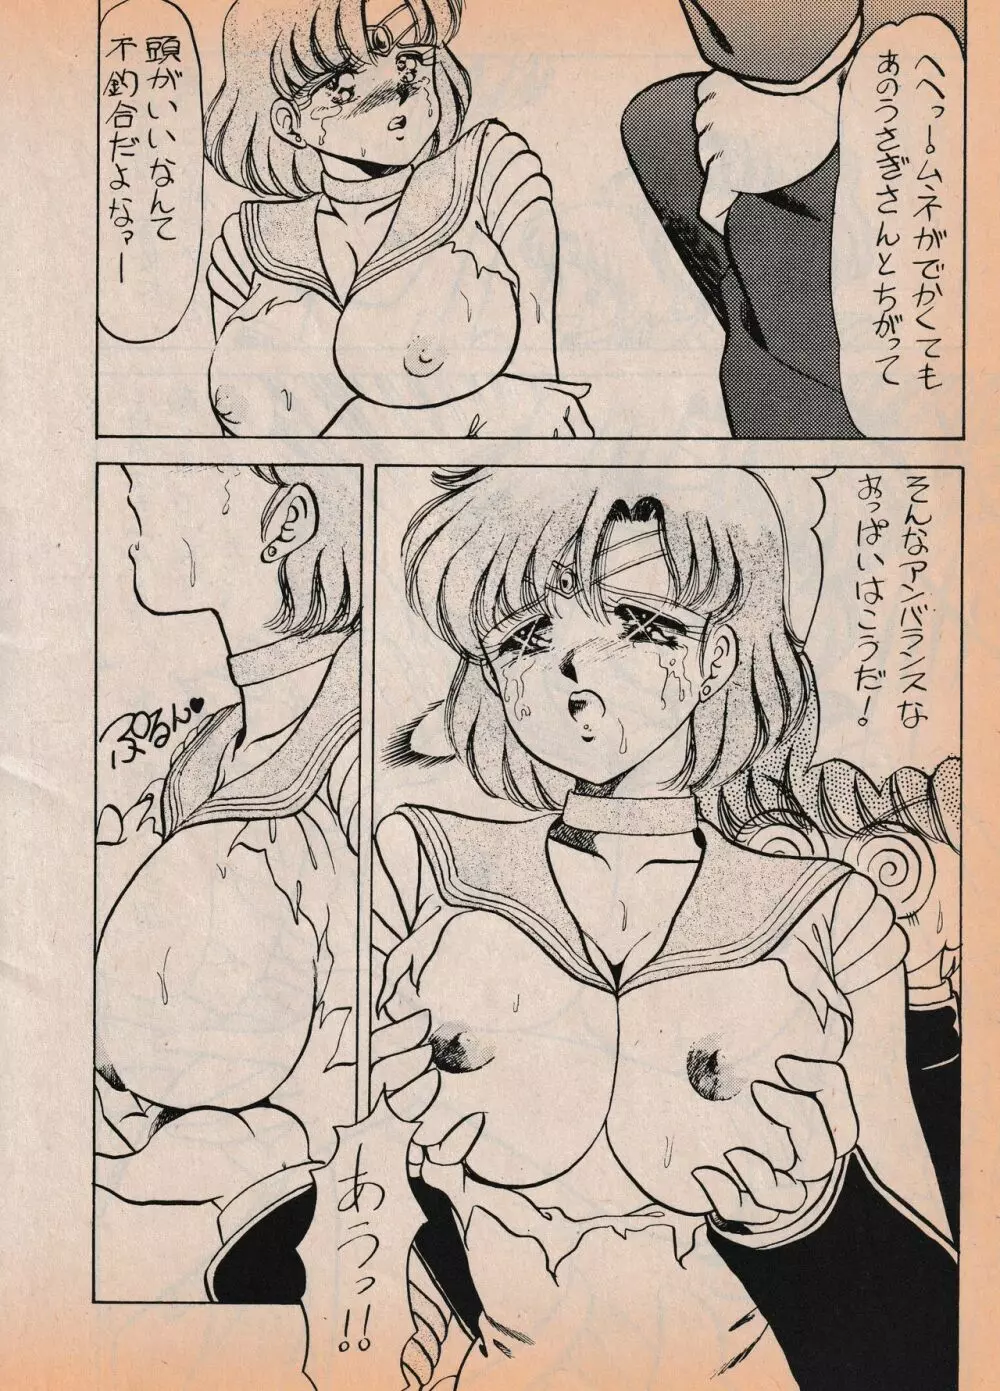 Sailor X vol. 7 - The Kama Sutra Of Pain Page.17